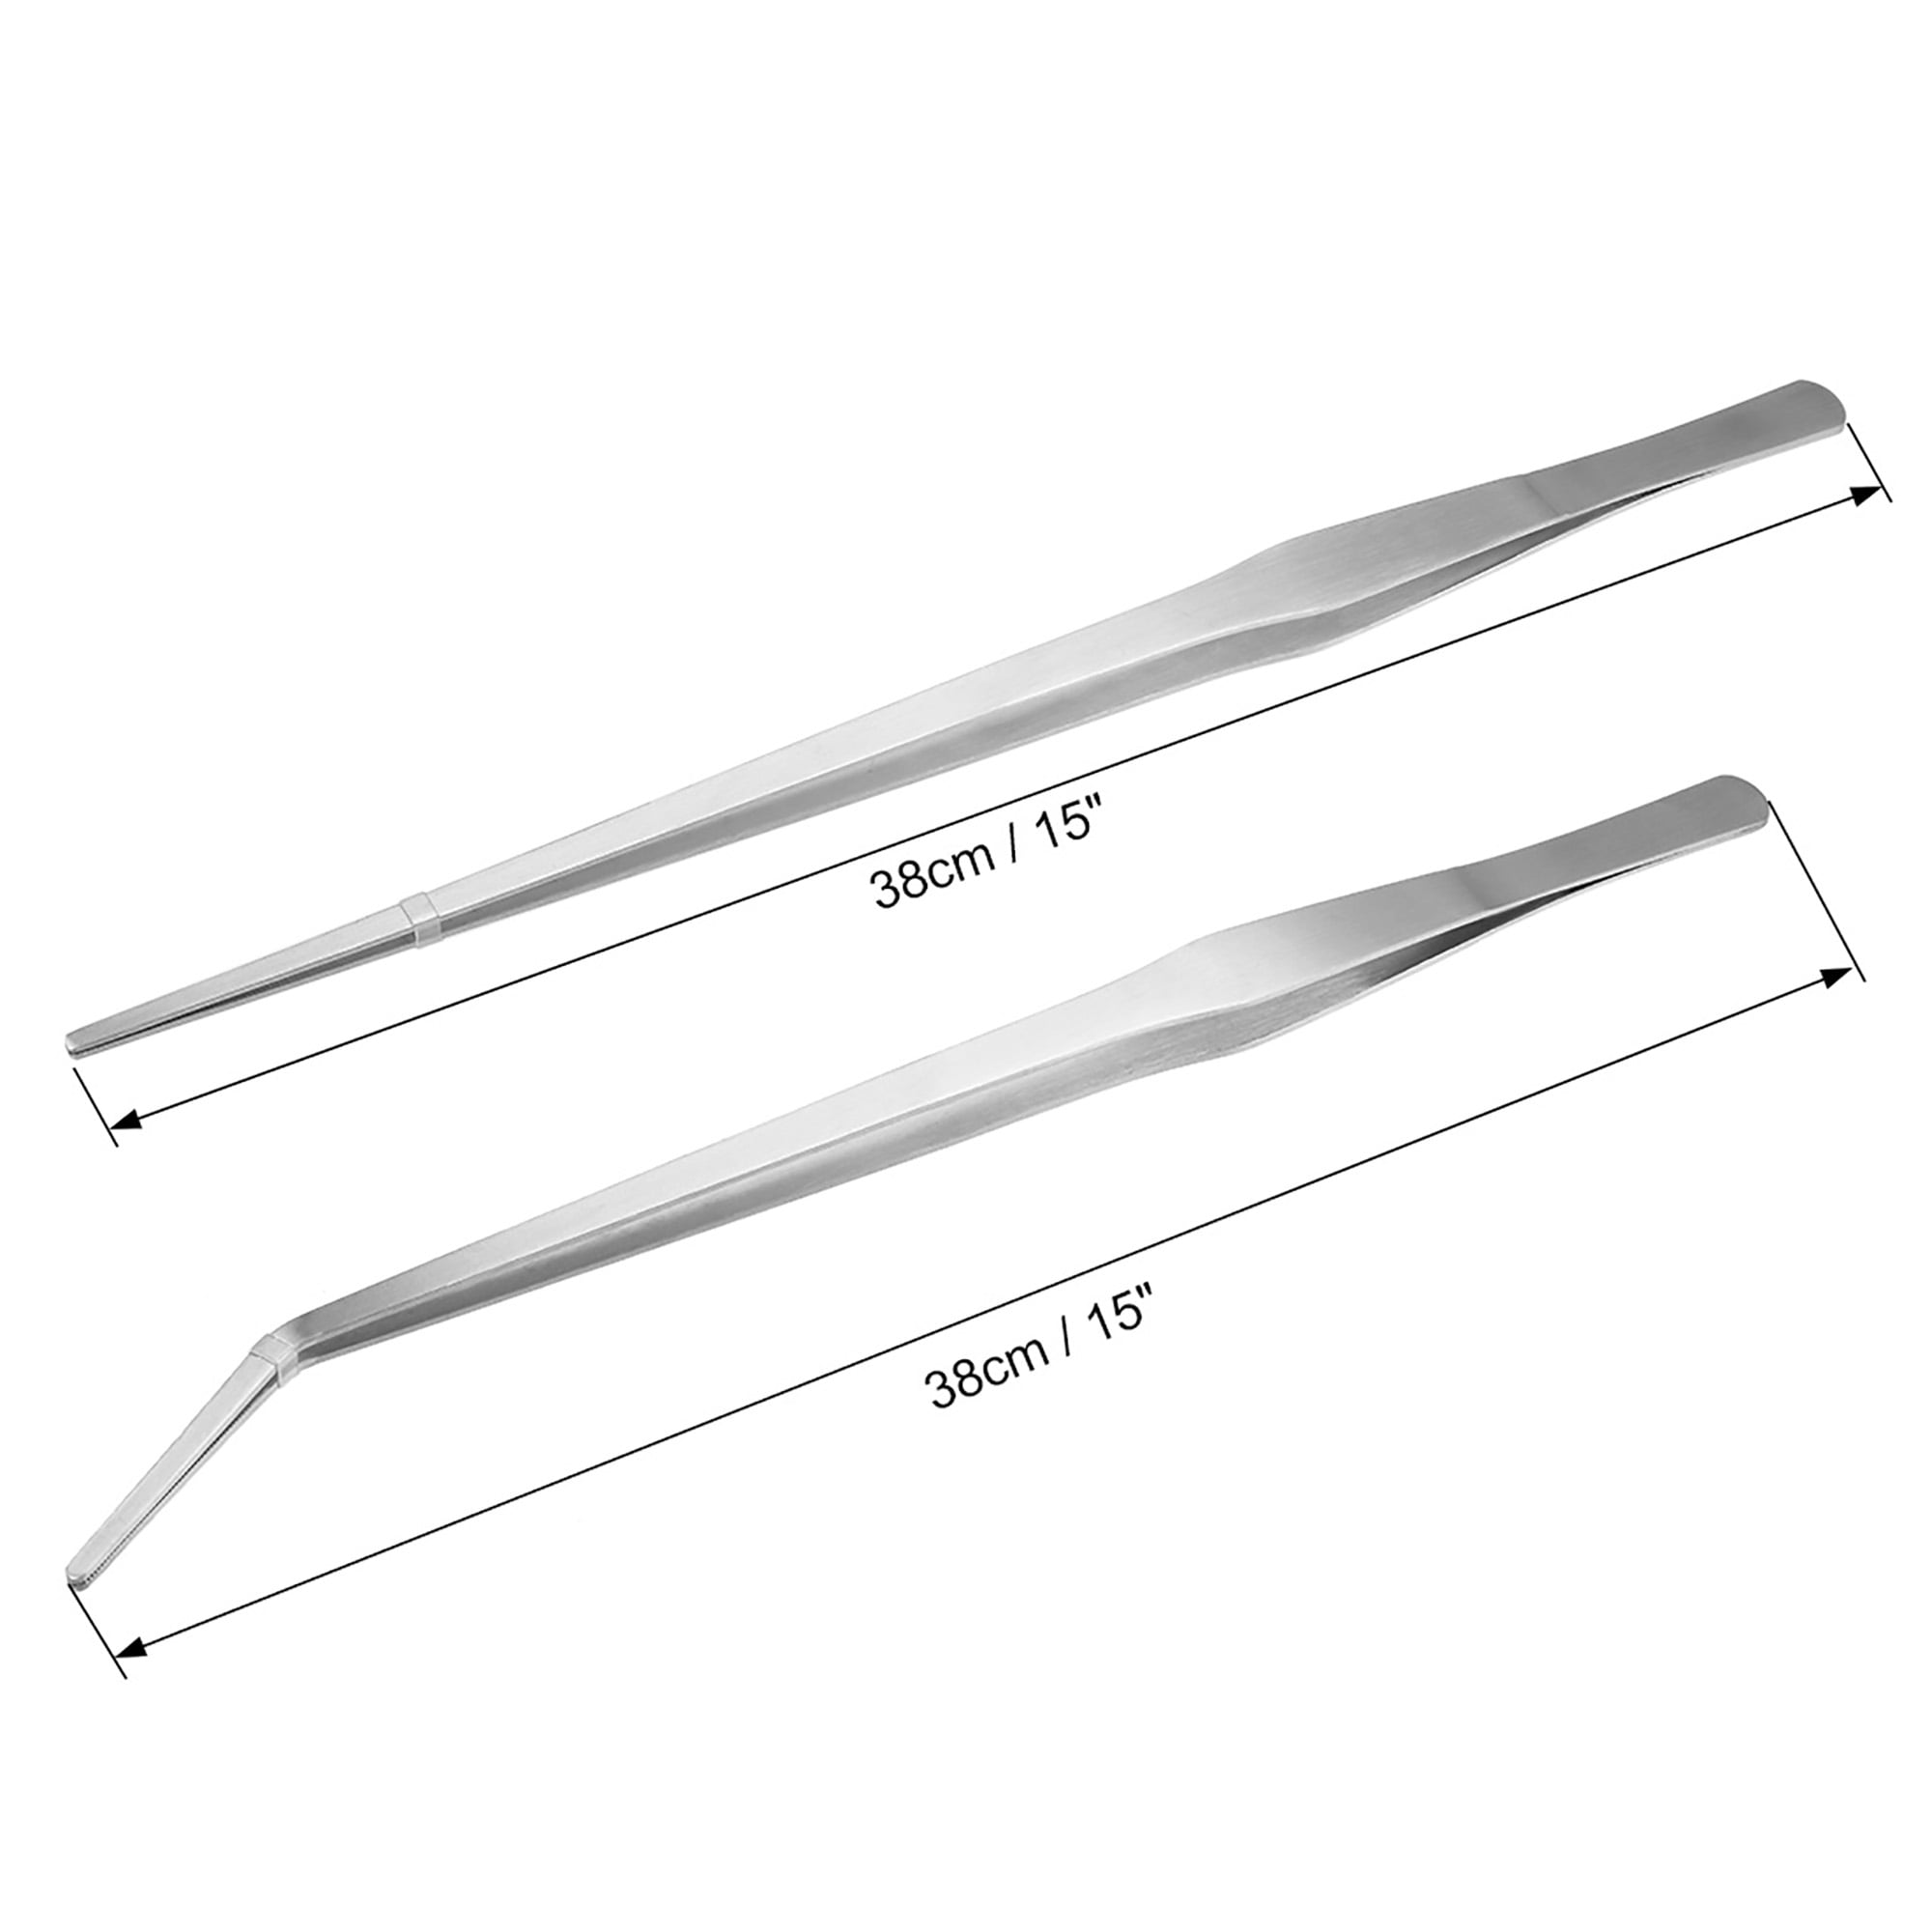 Aquarium Tweezers Extra Long 15 inches, Luxiv Stainless Steel